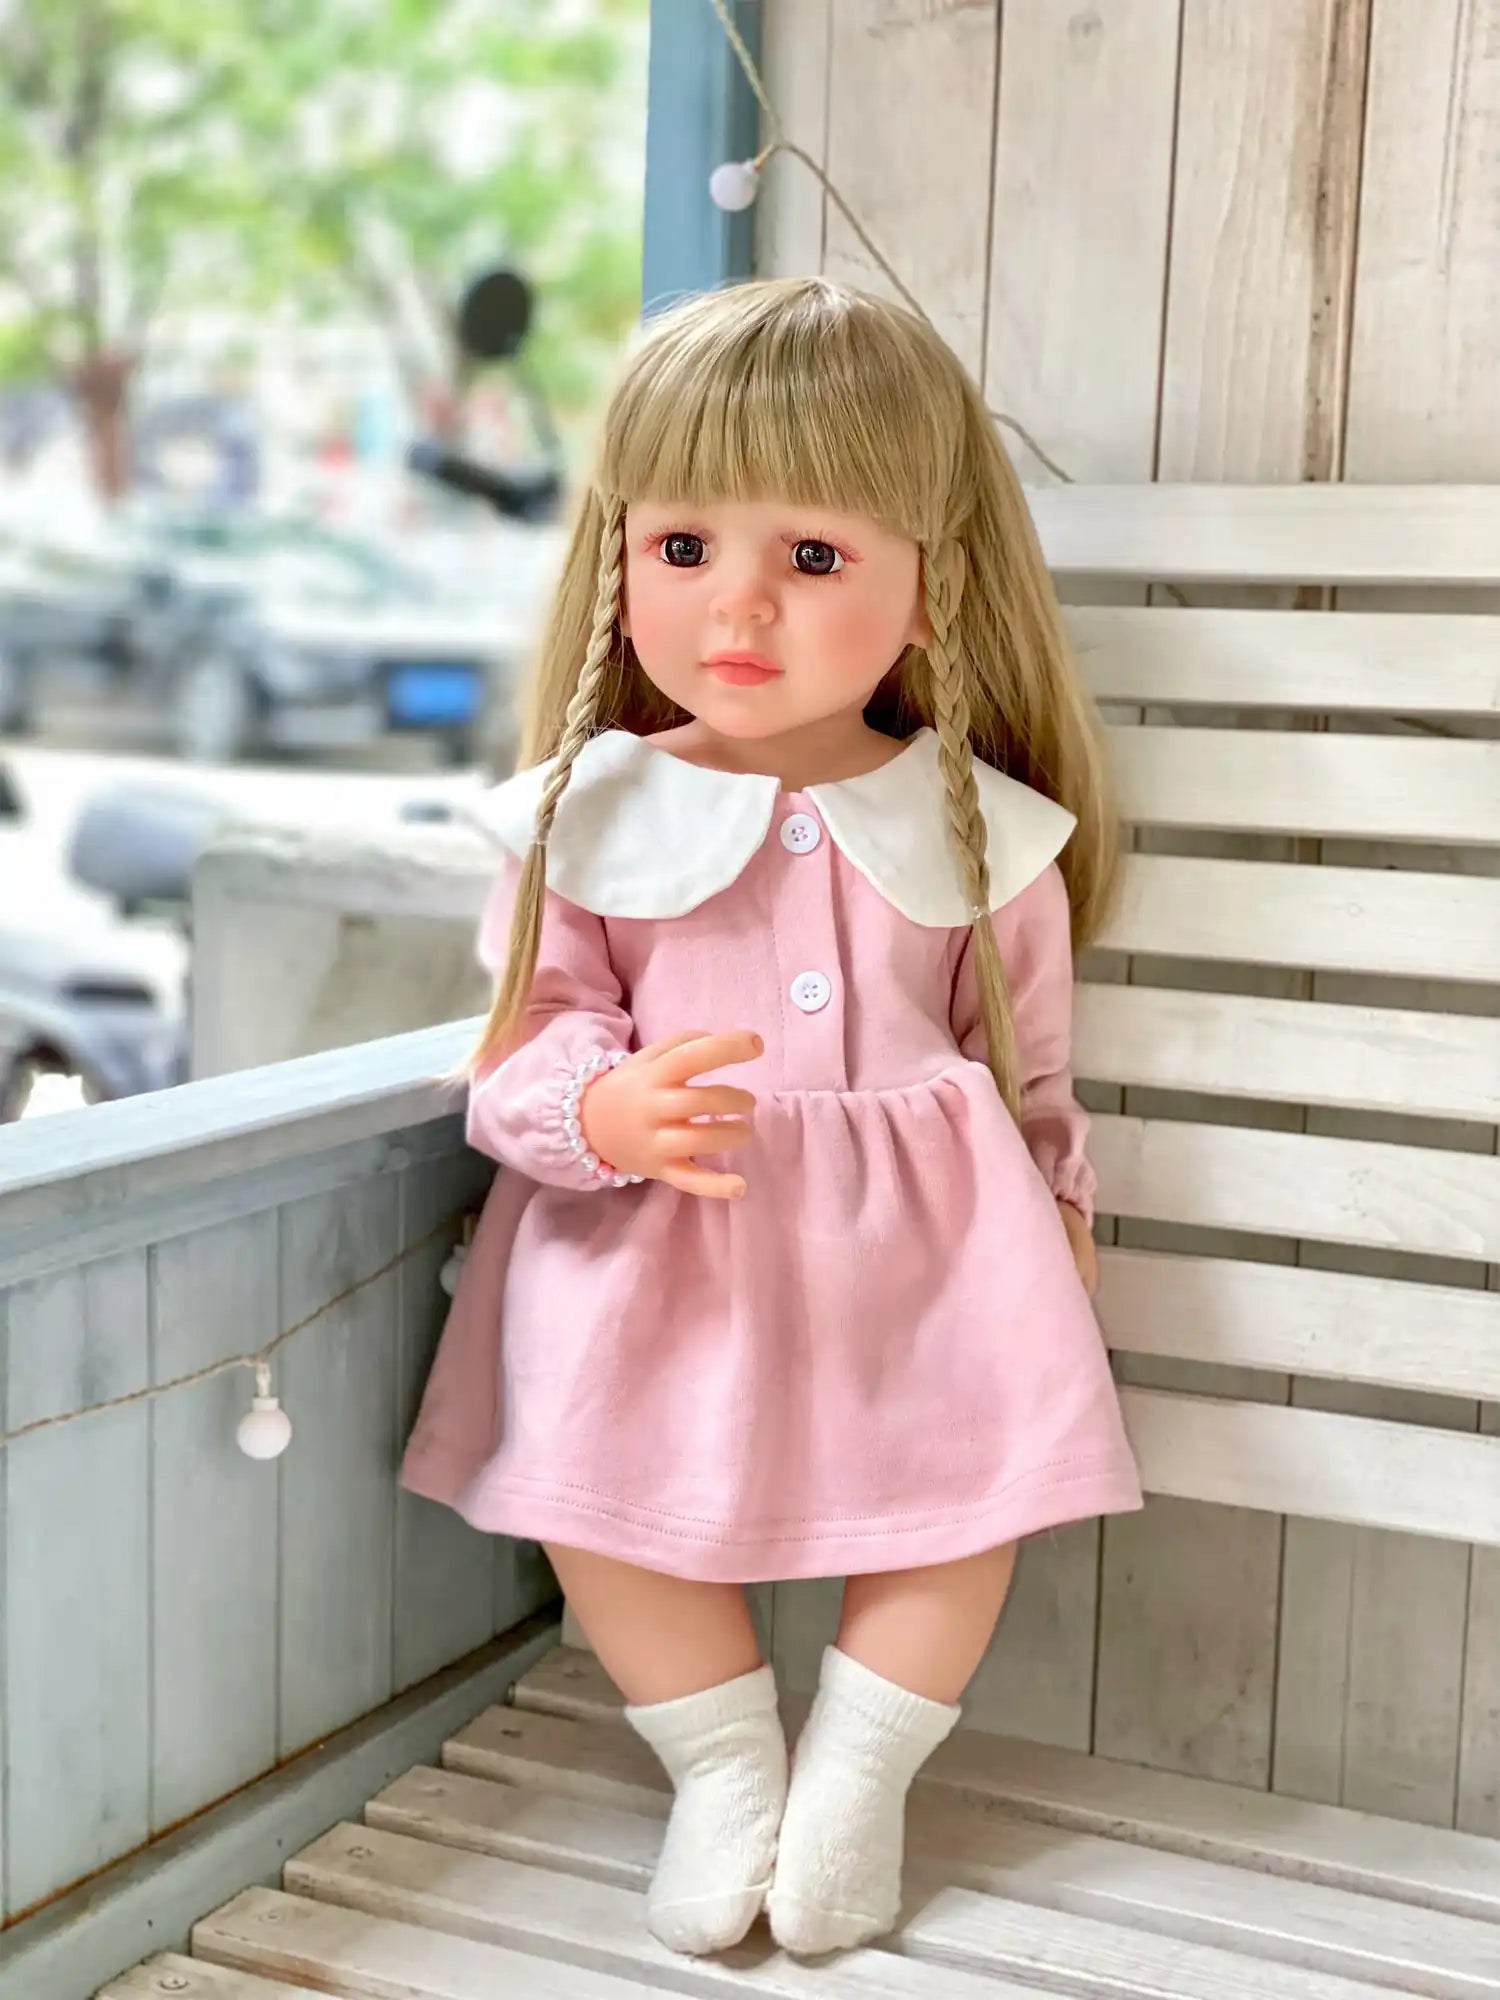 Realistic doll with braided hair and a collared pink dress, posed on white wooden steps.